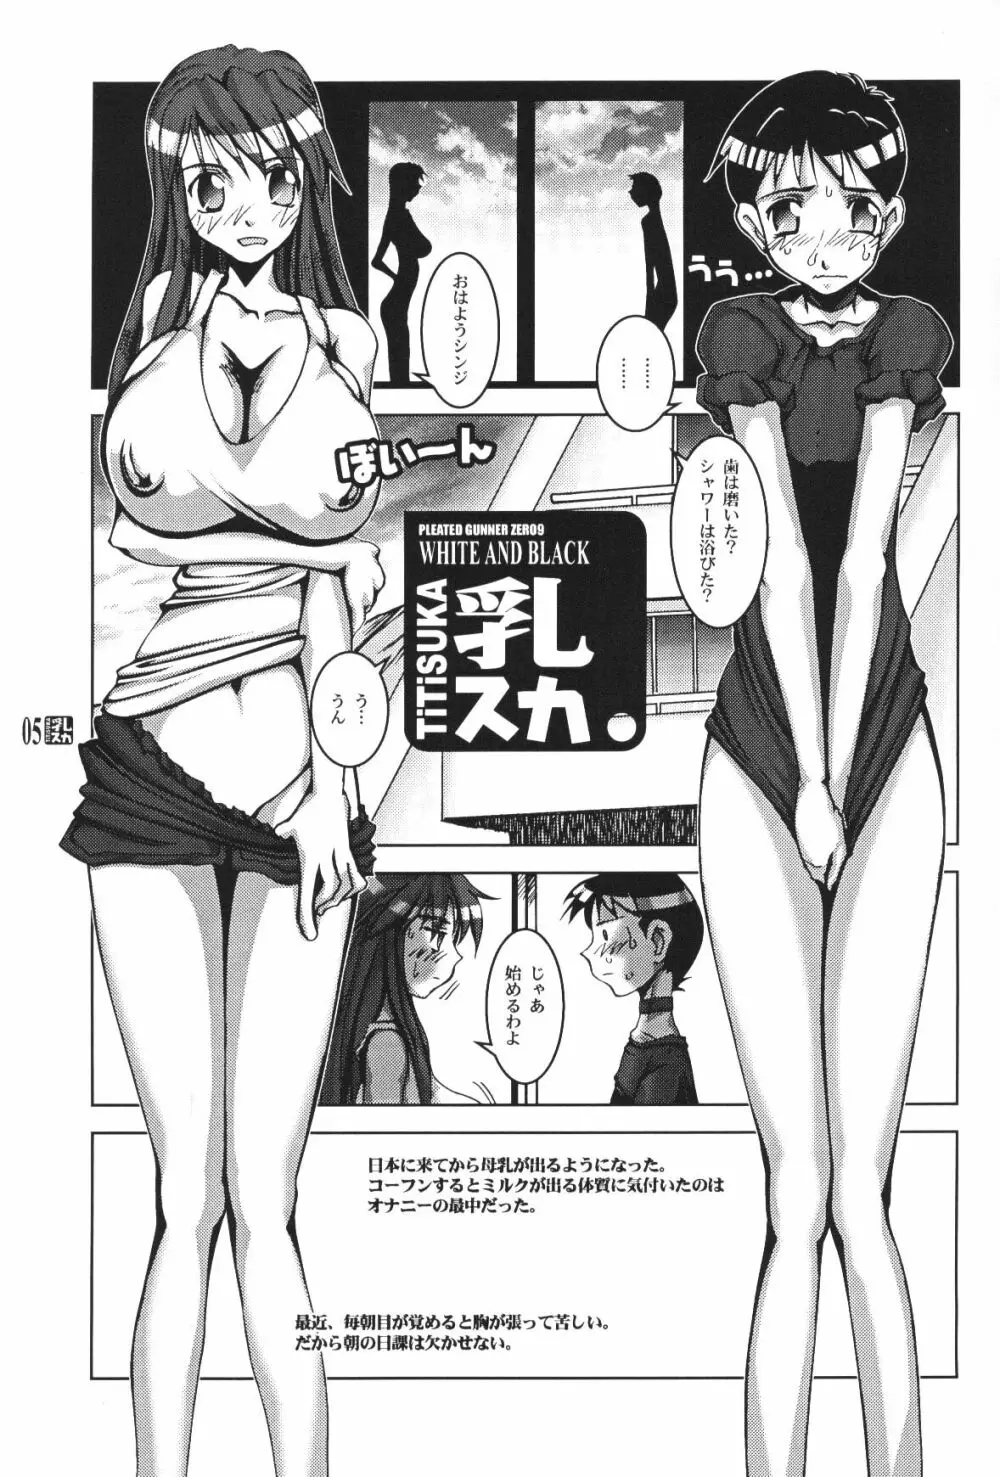 PLEATED GUNNER #09 BLACK AND WHITE 乳スカ Page.4